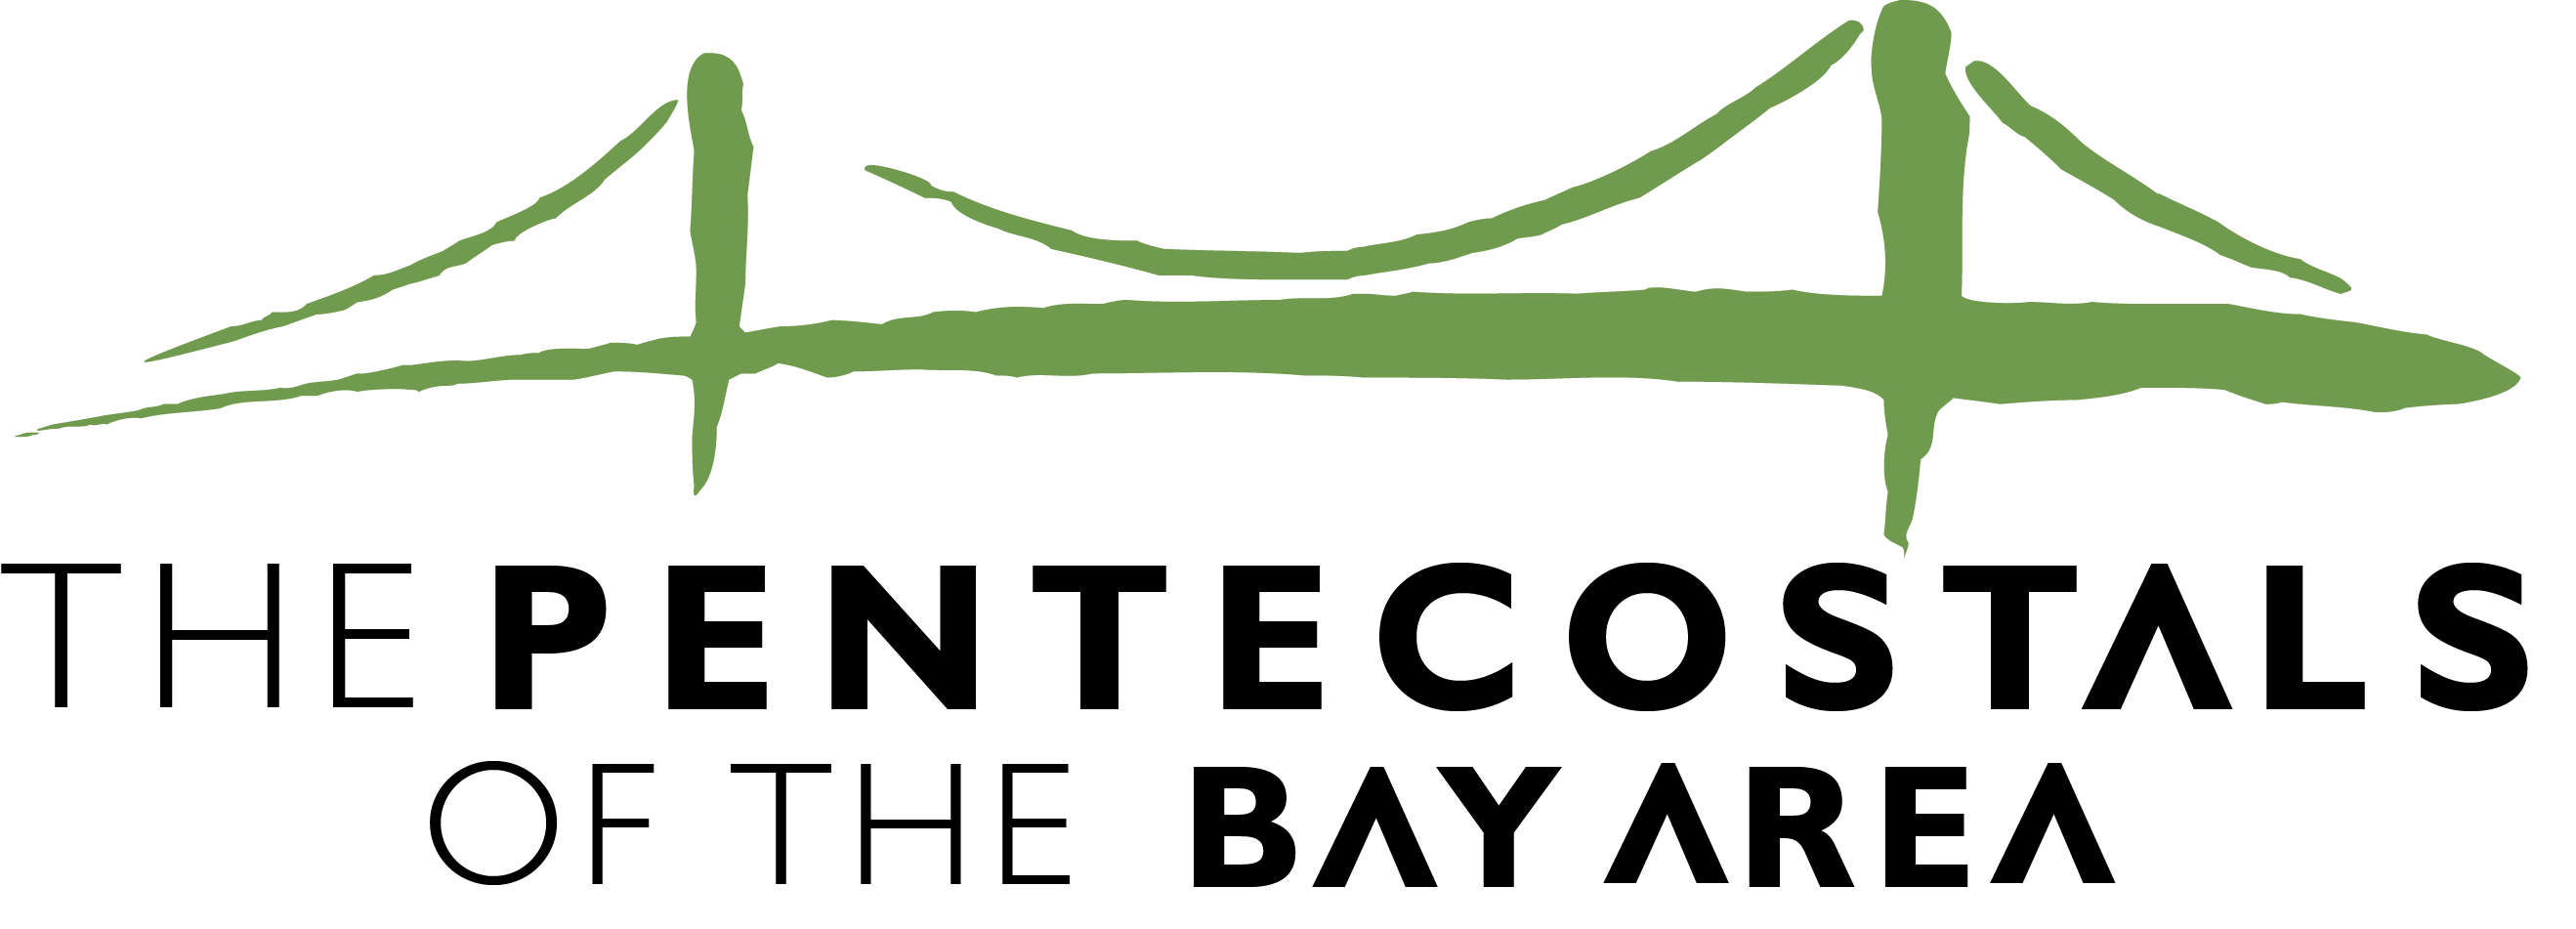 The Pentecostals of the Bay Area